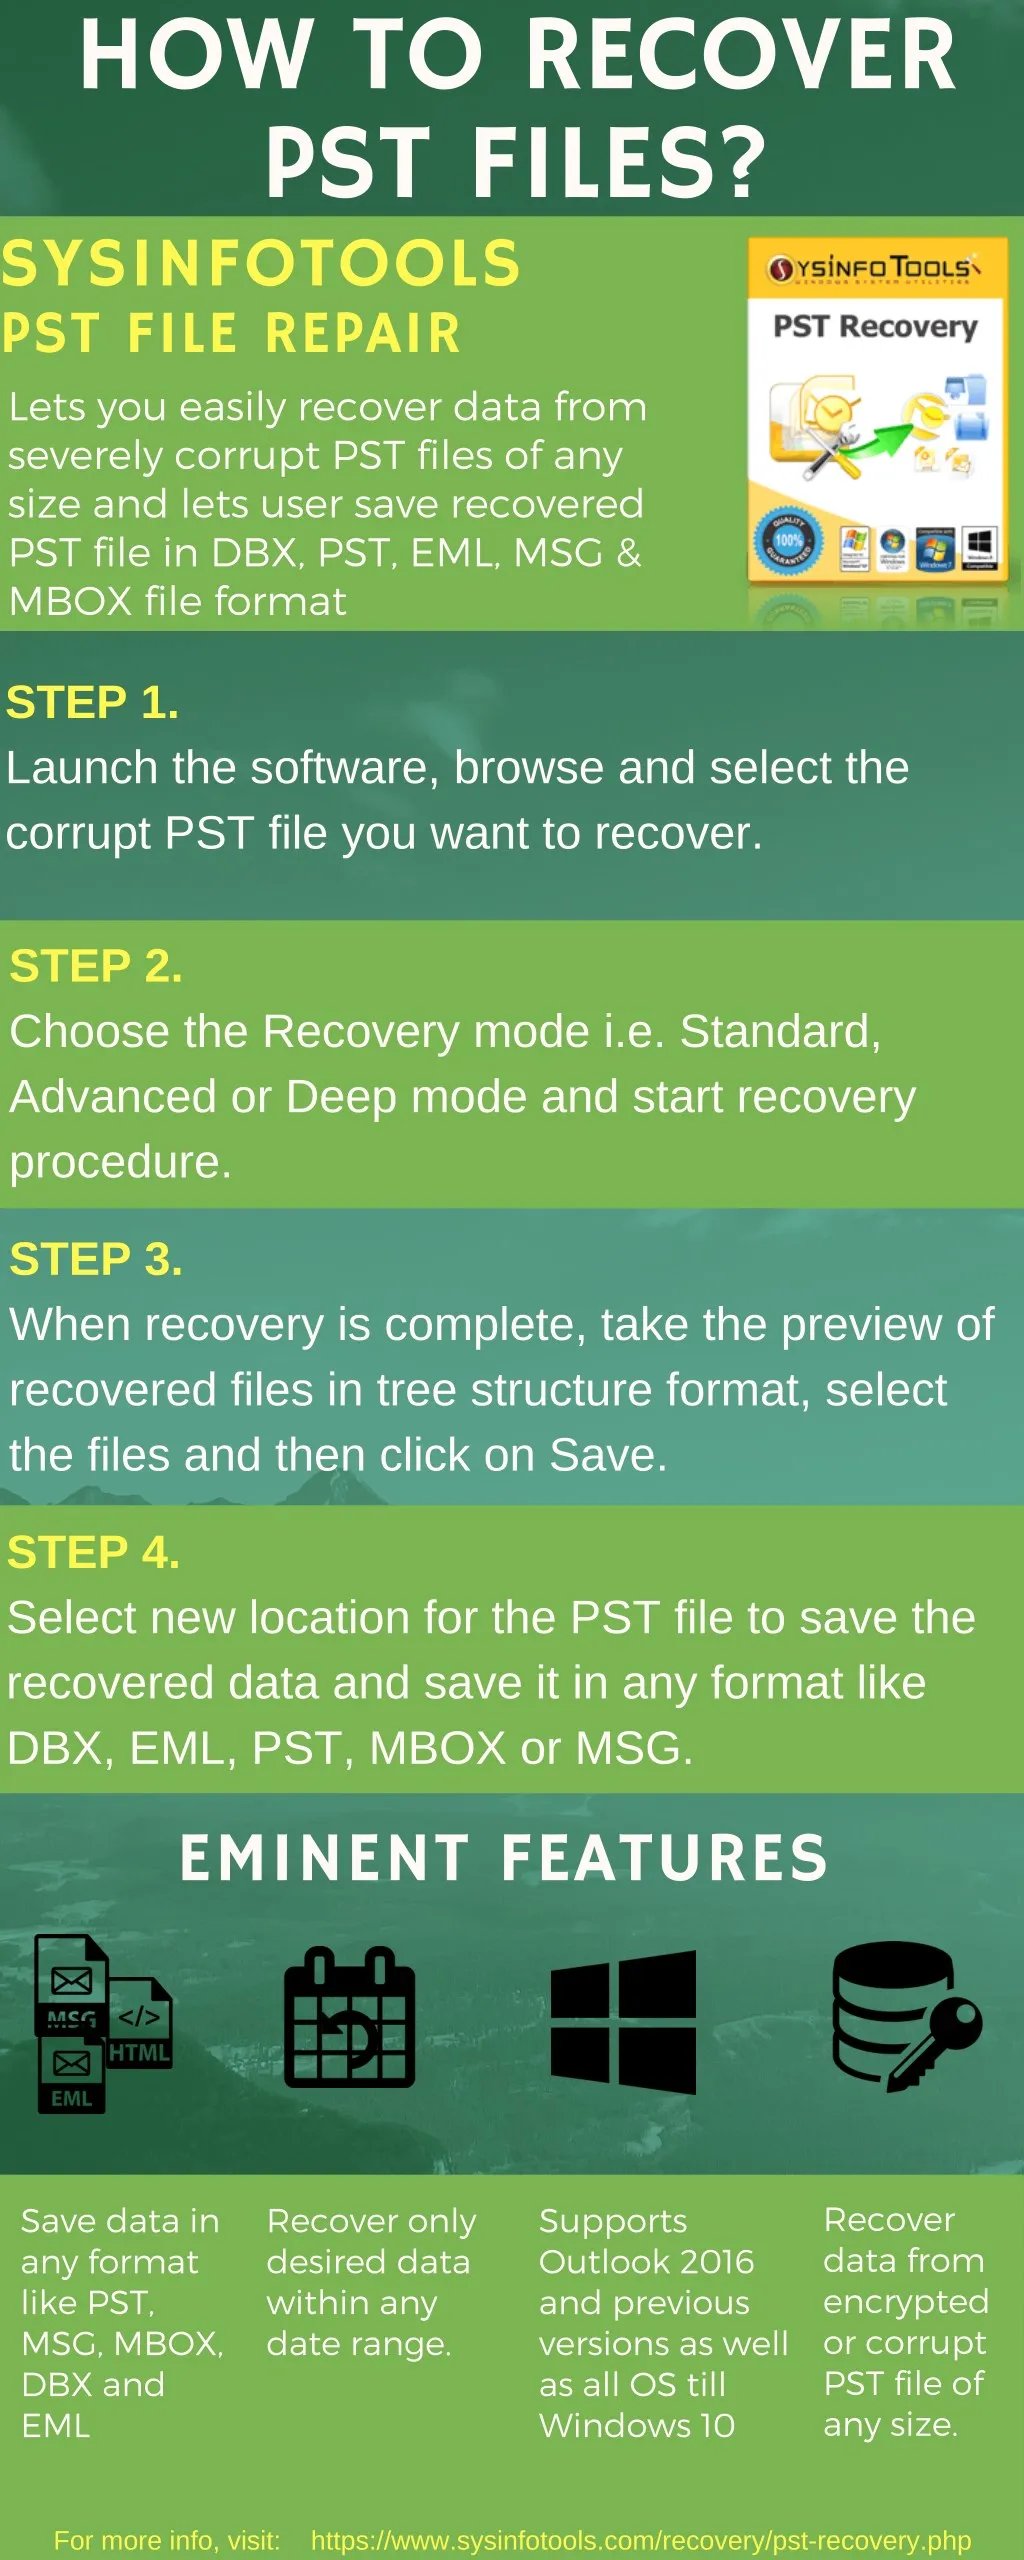 how to recover pst files sysinfotools pst file